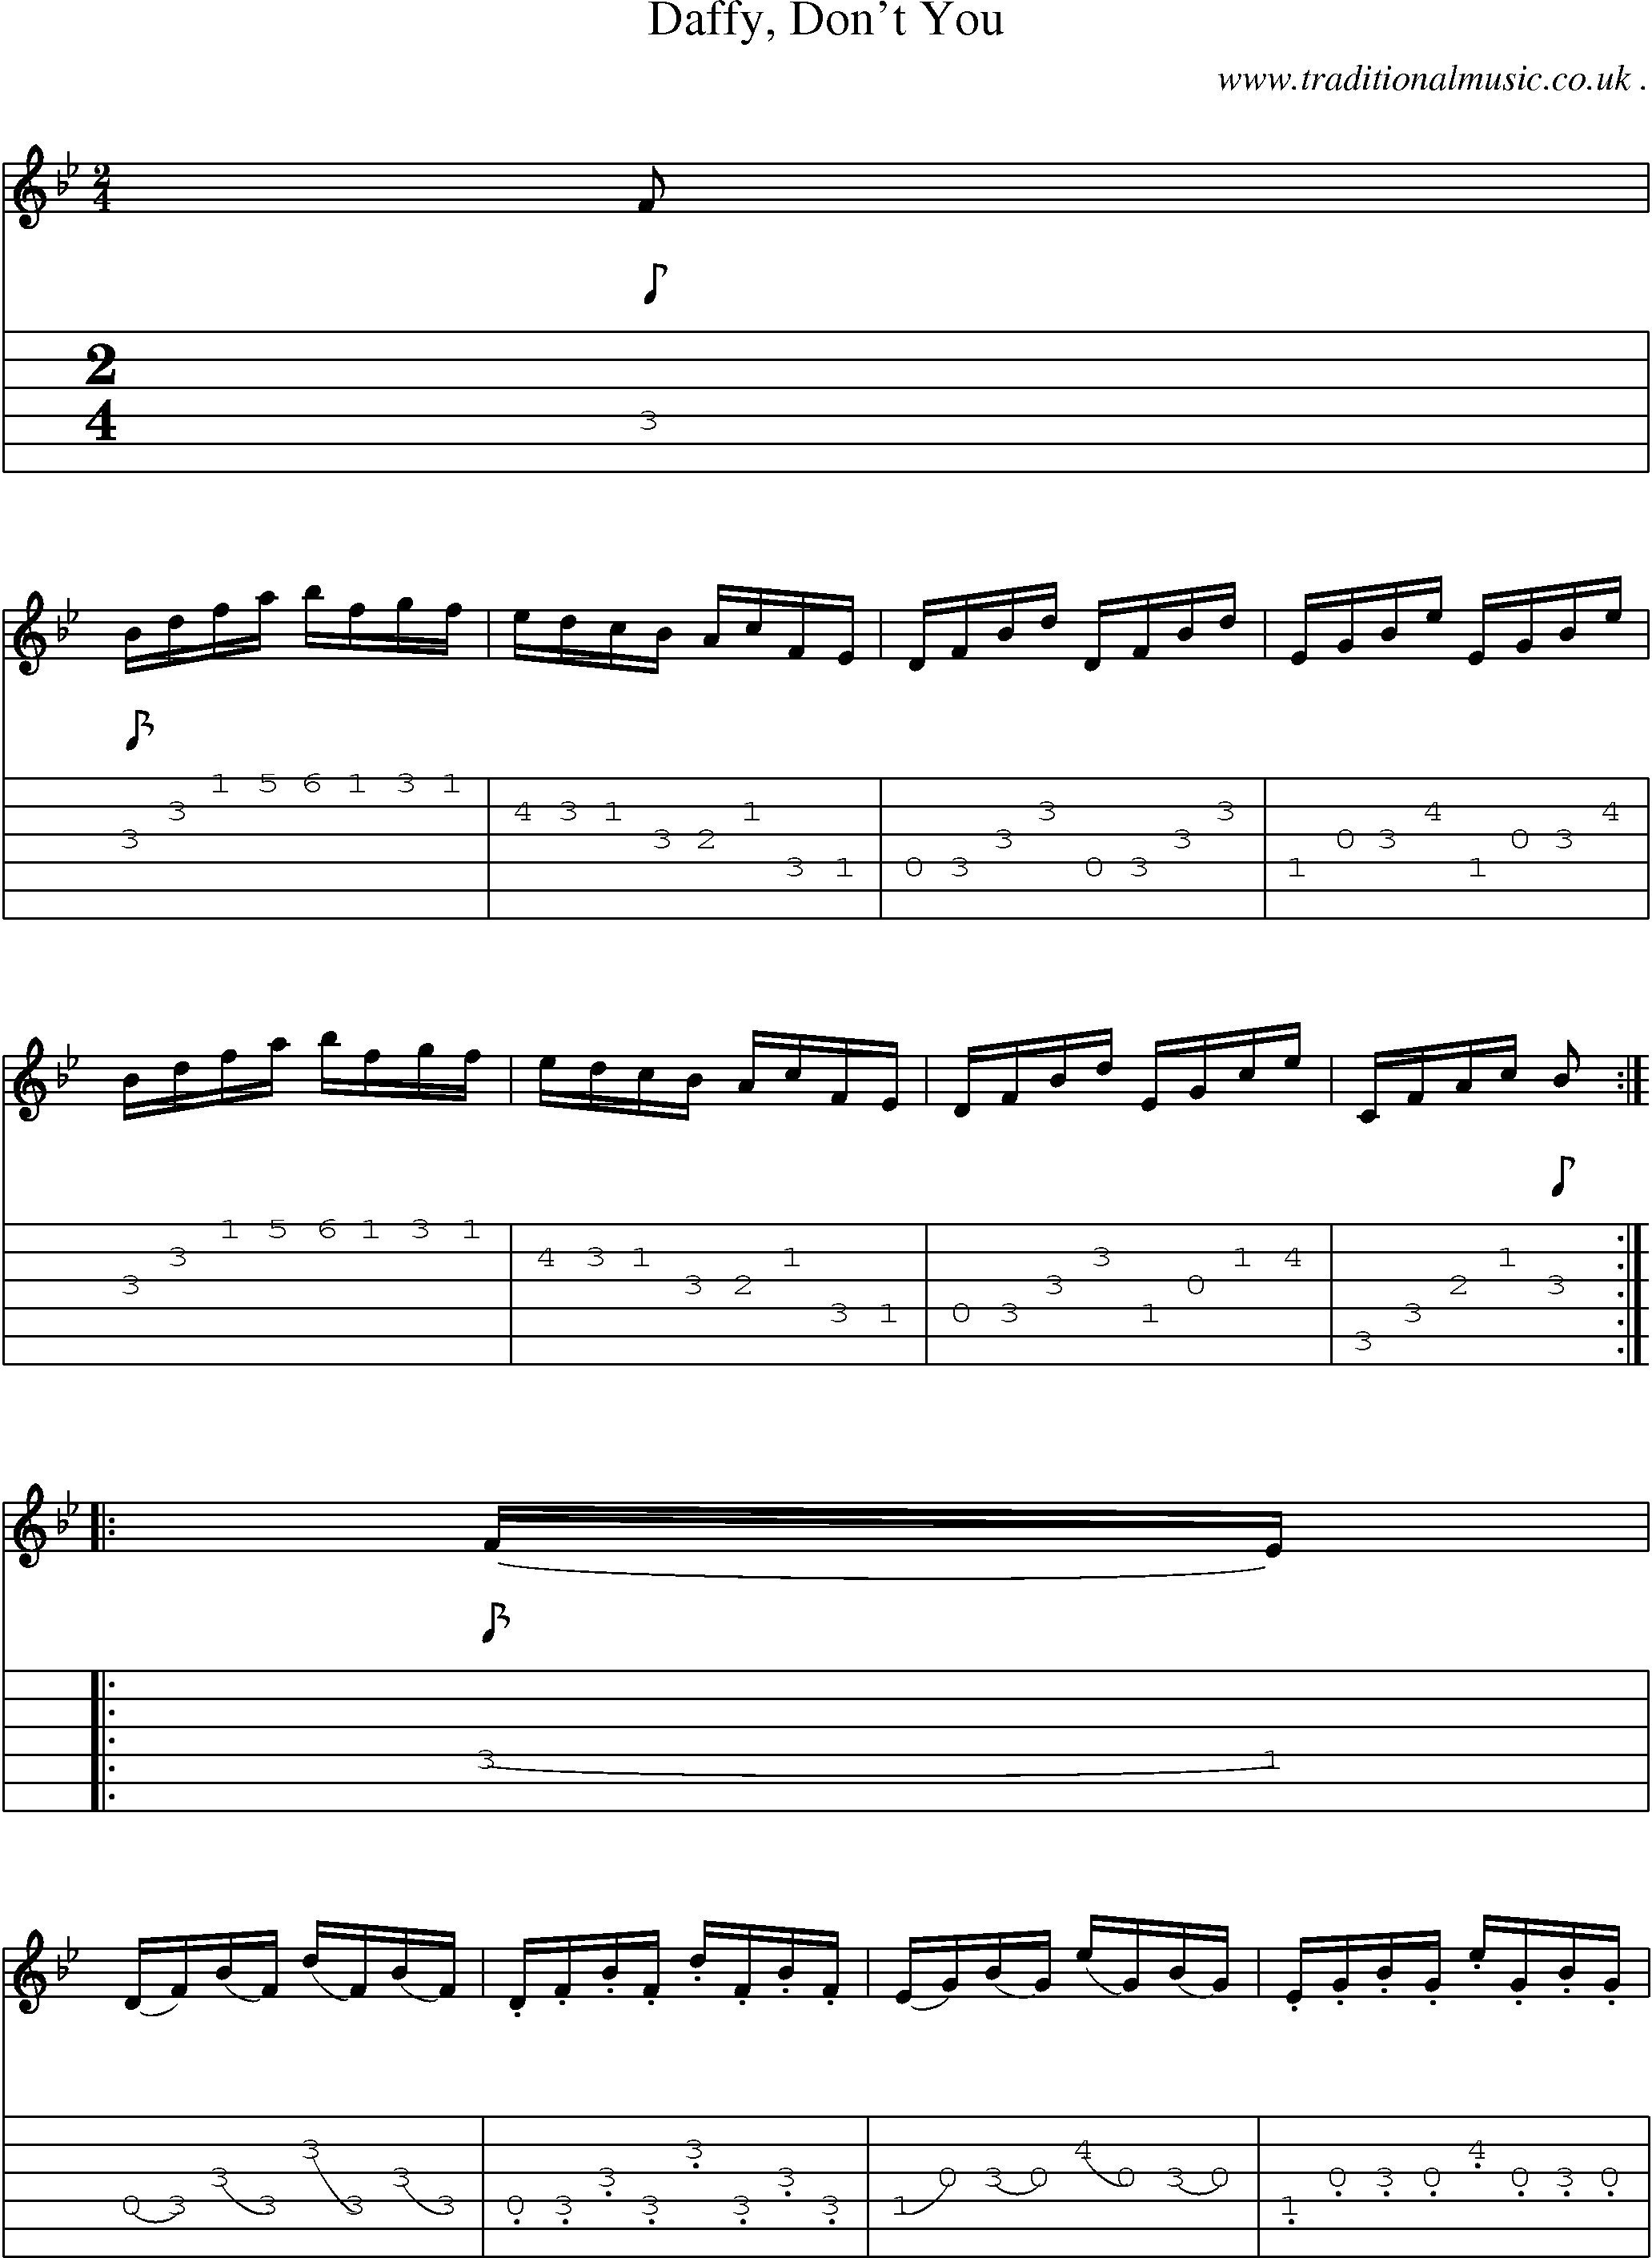 Sheet-Music and Guitar Tabs for Daffy Dont You